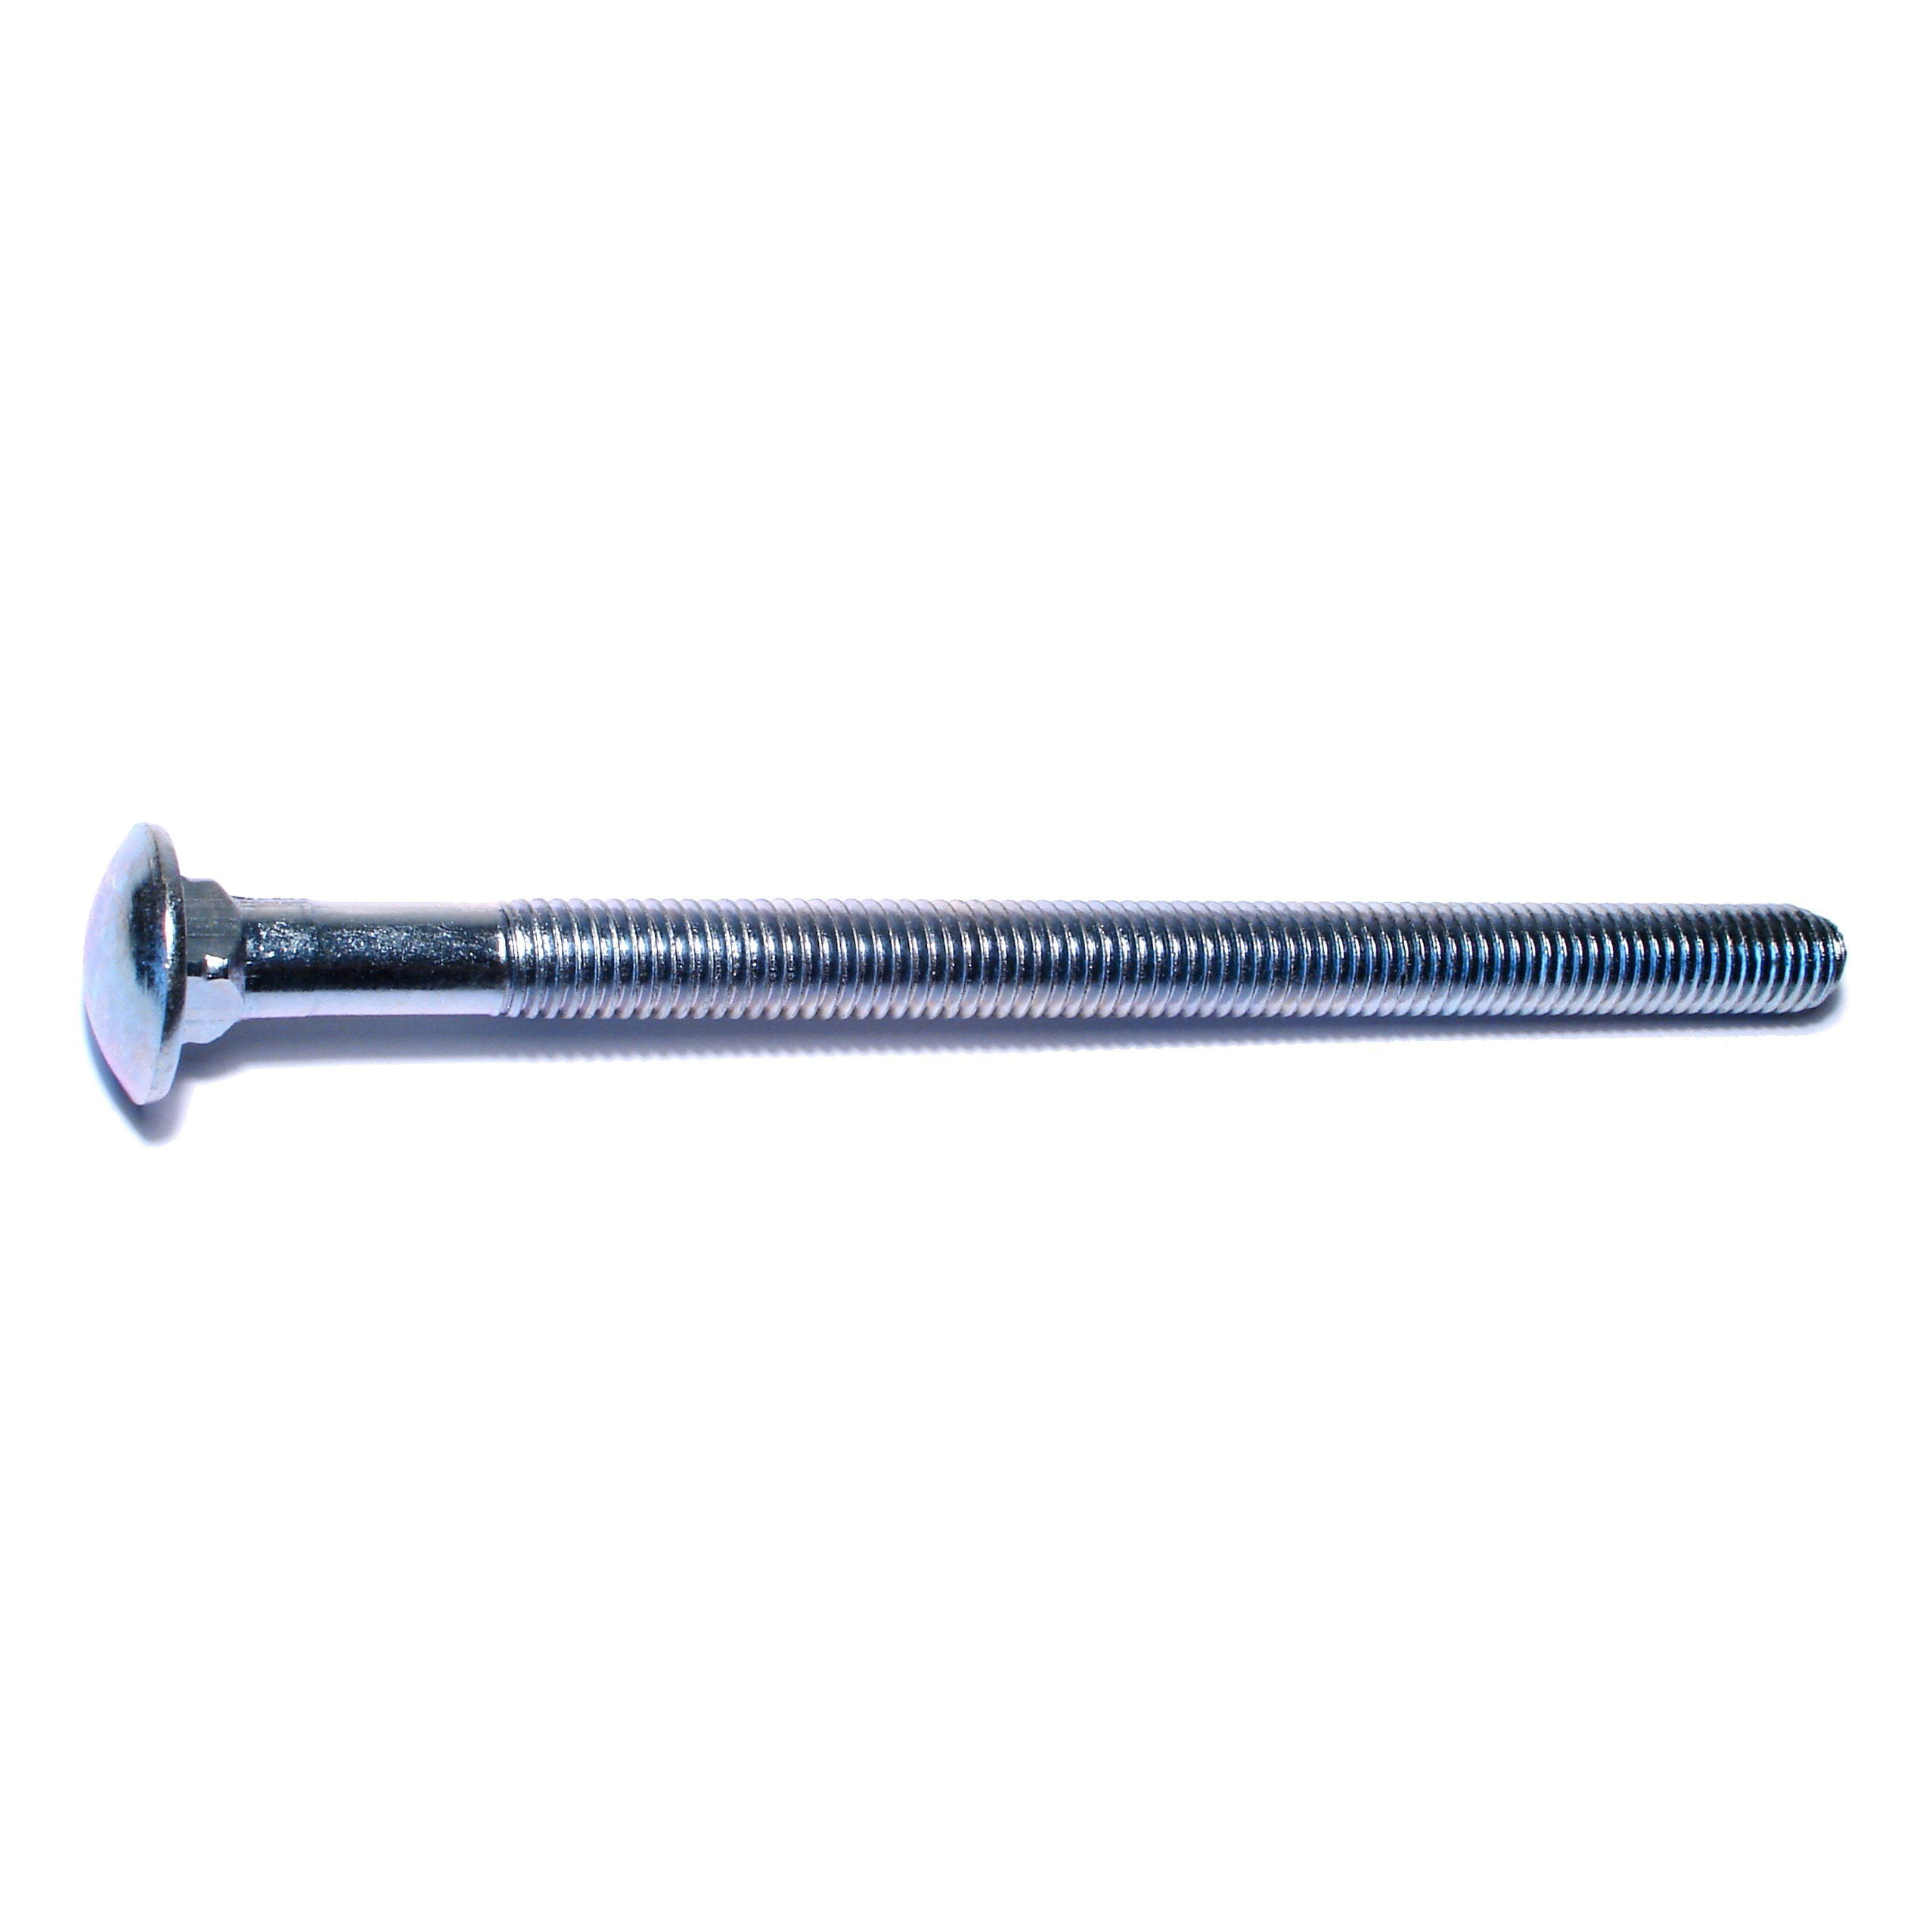 Stainless Steel Carriage Bolt 1/PC-1/2-13 x 2-1/2 